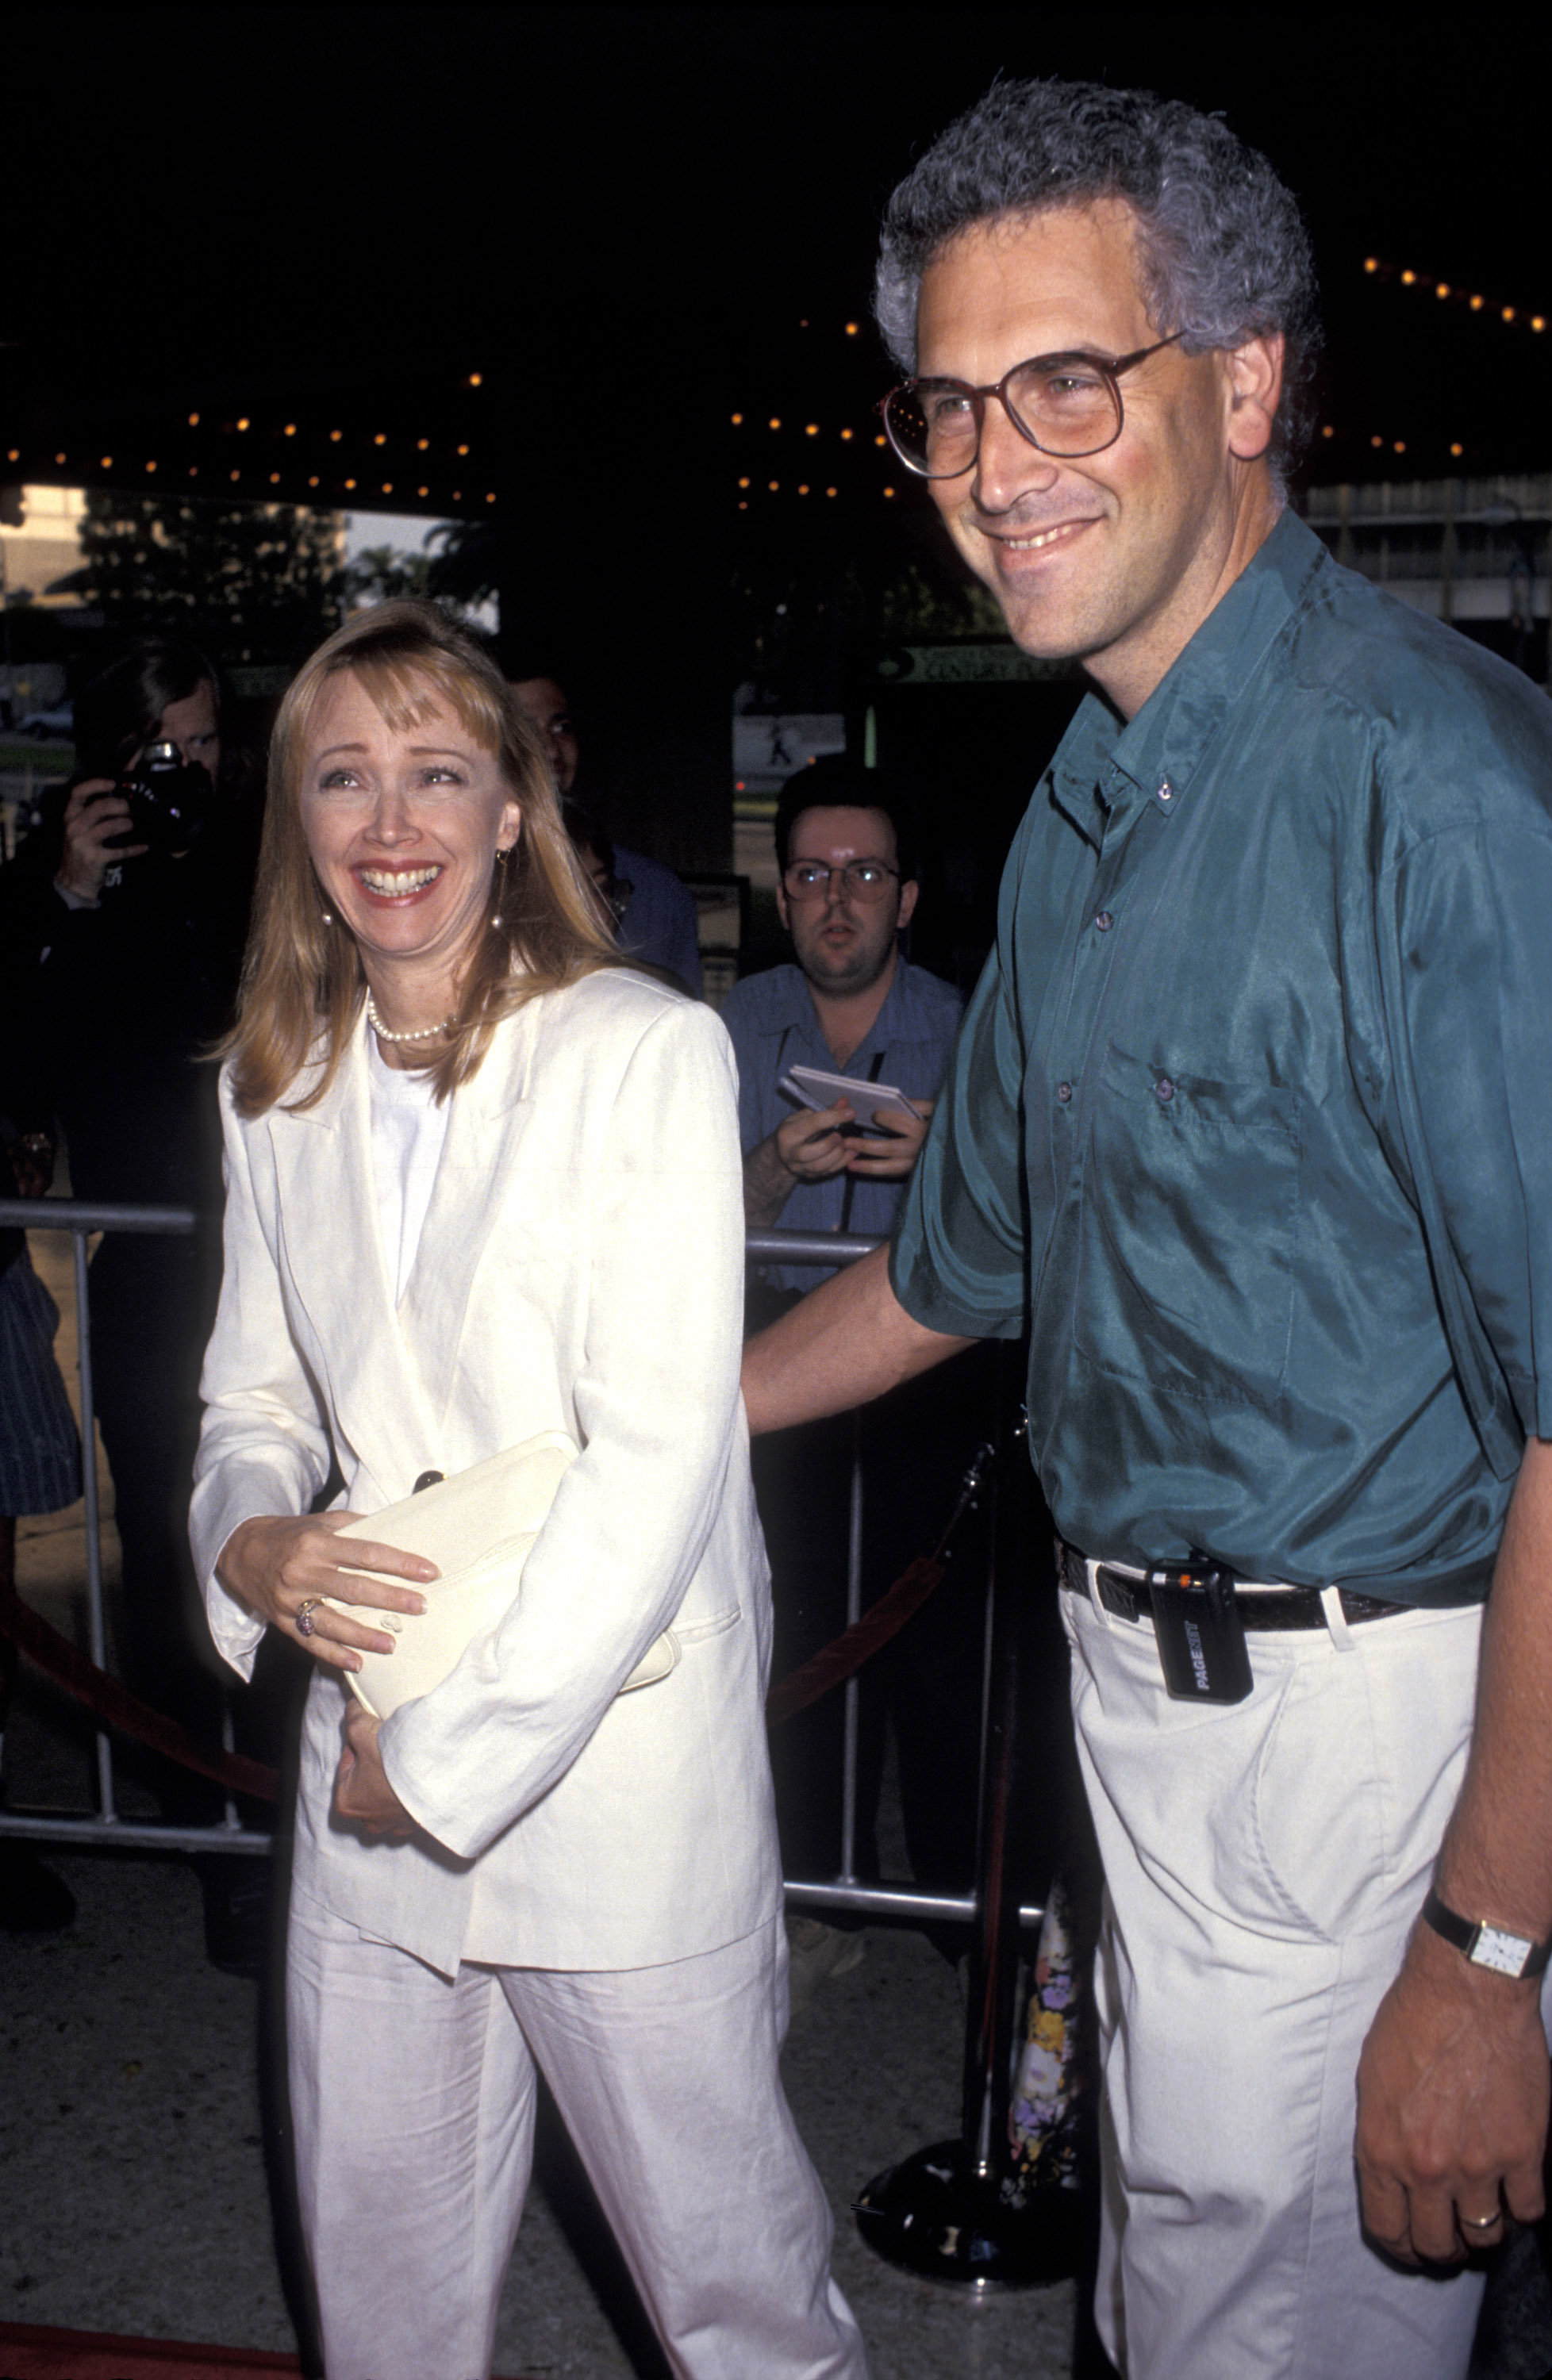 Shelley Long and Bruce Tyson during "Sleepless In Seattle" - Los Angeles Premiere at Cineplex Odeon in Century City, California, United States. | Source: Getty Images